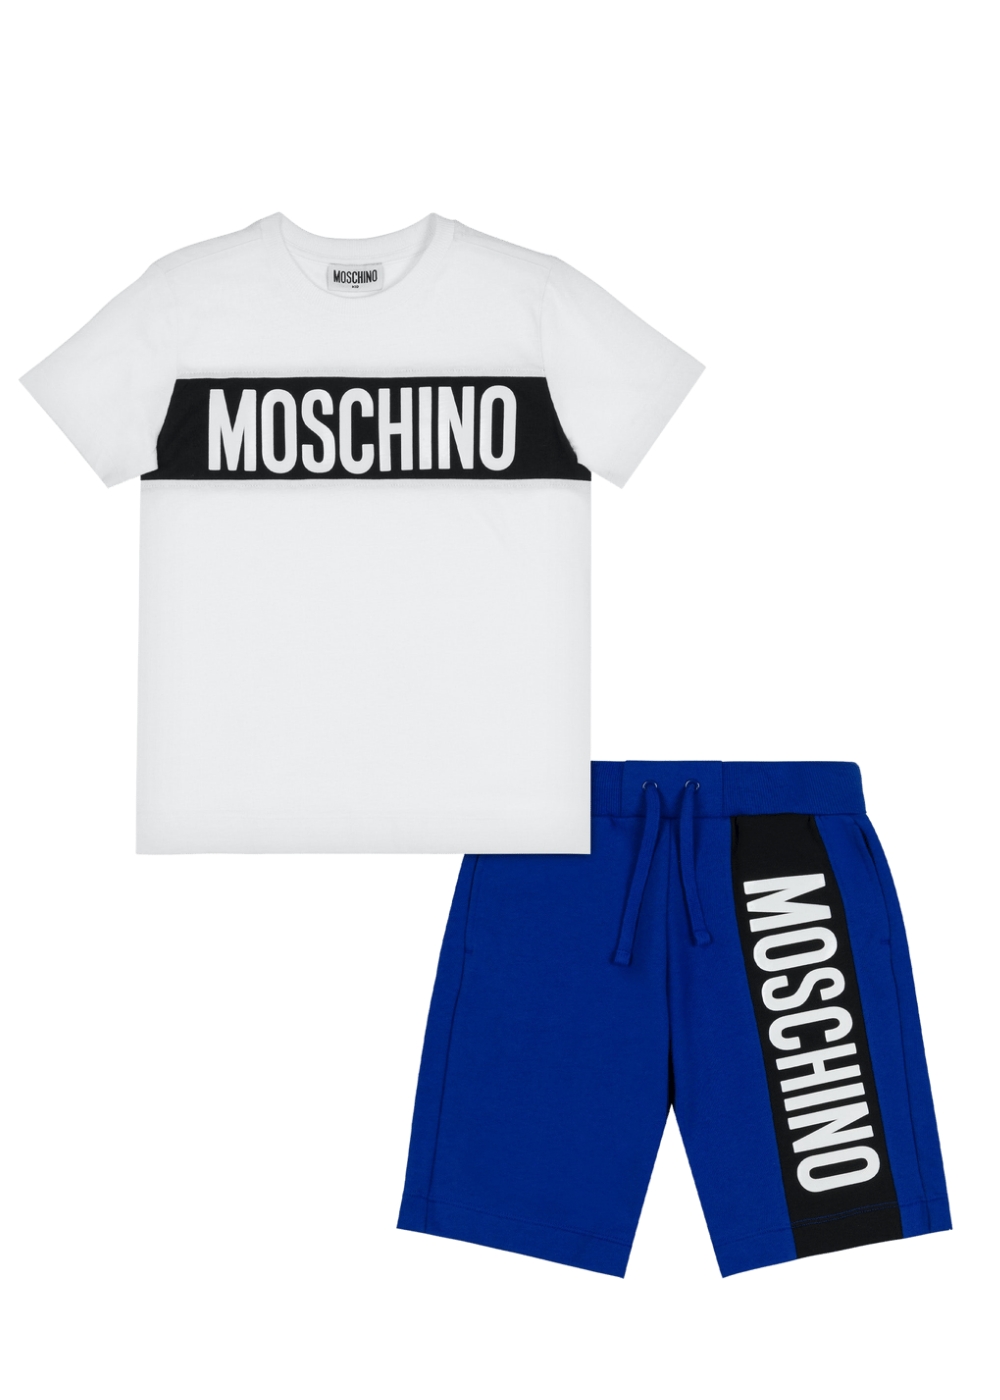 Featured image for “Moschino Completo T-shirt E Bermuda”